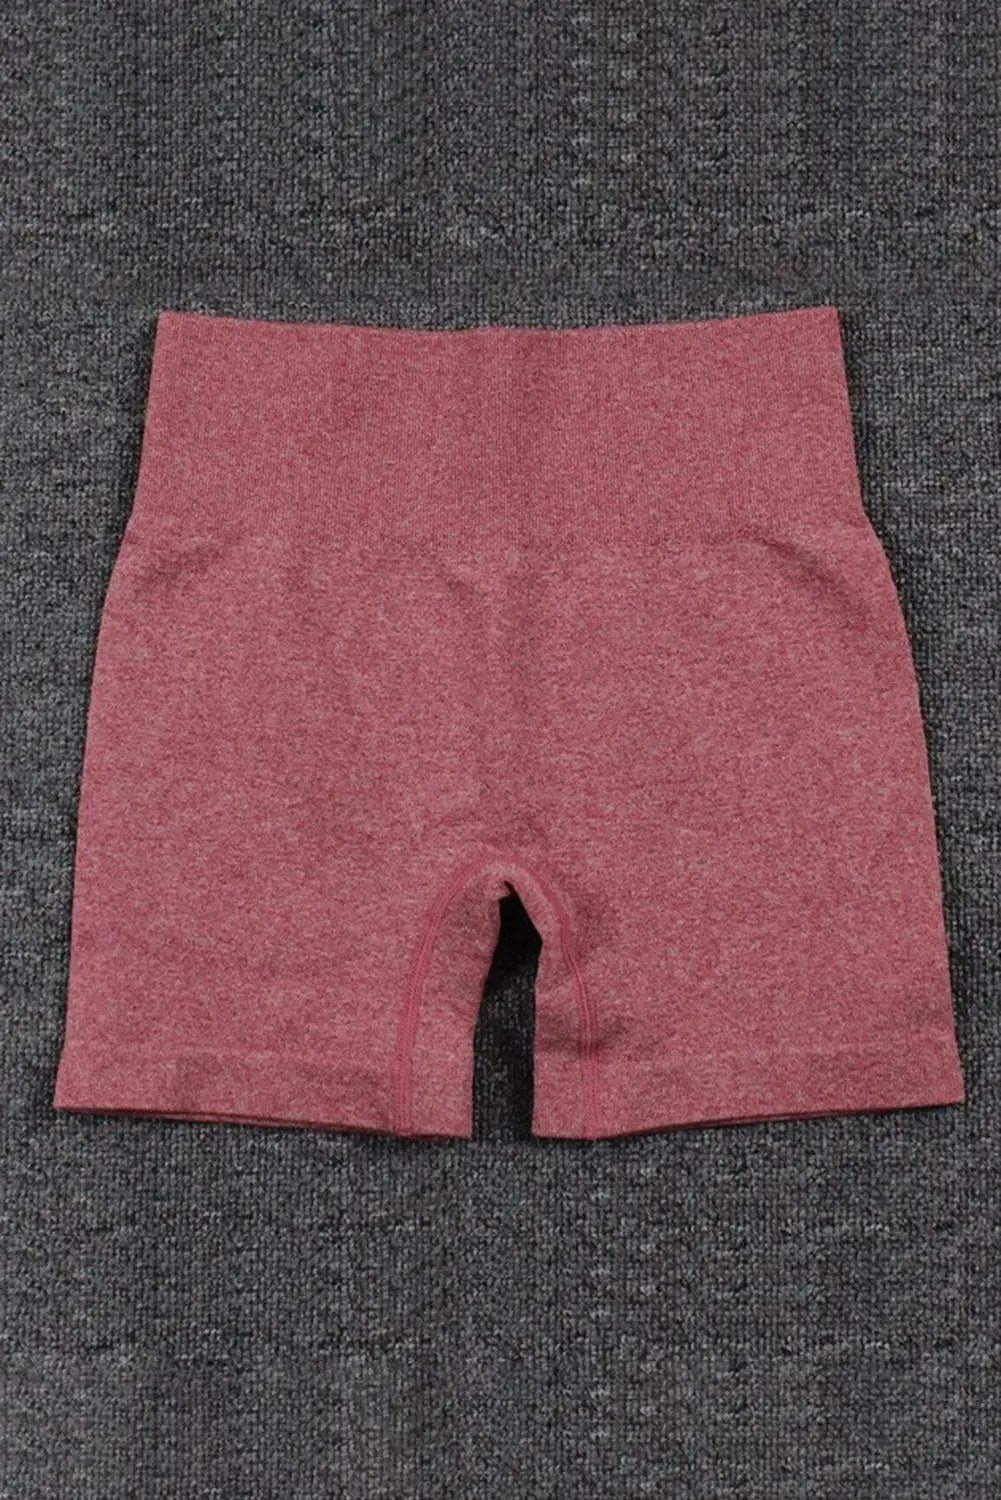 Red solid color high waist sports active shorts - s